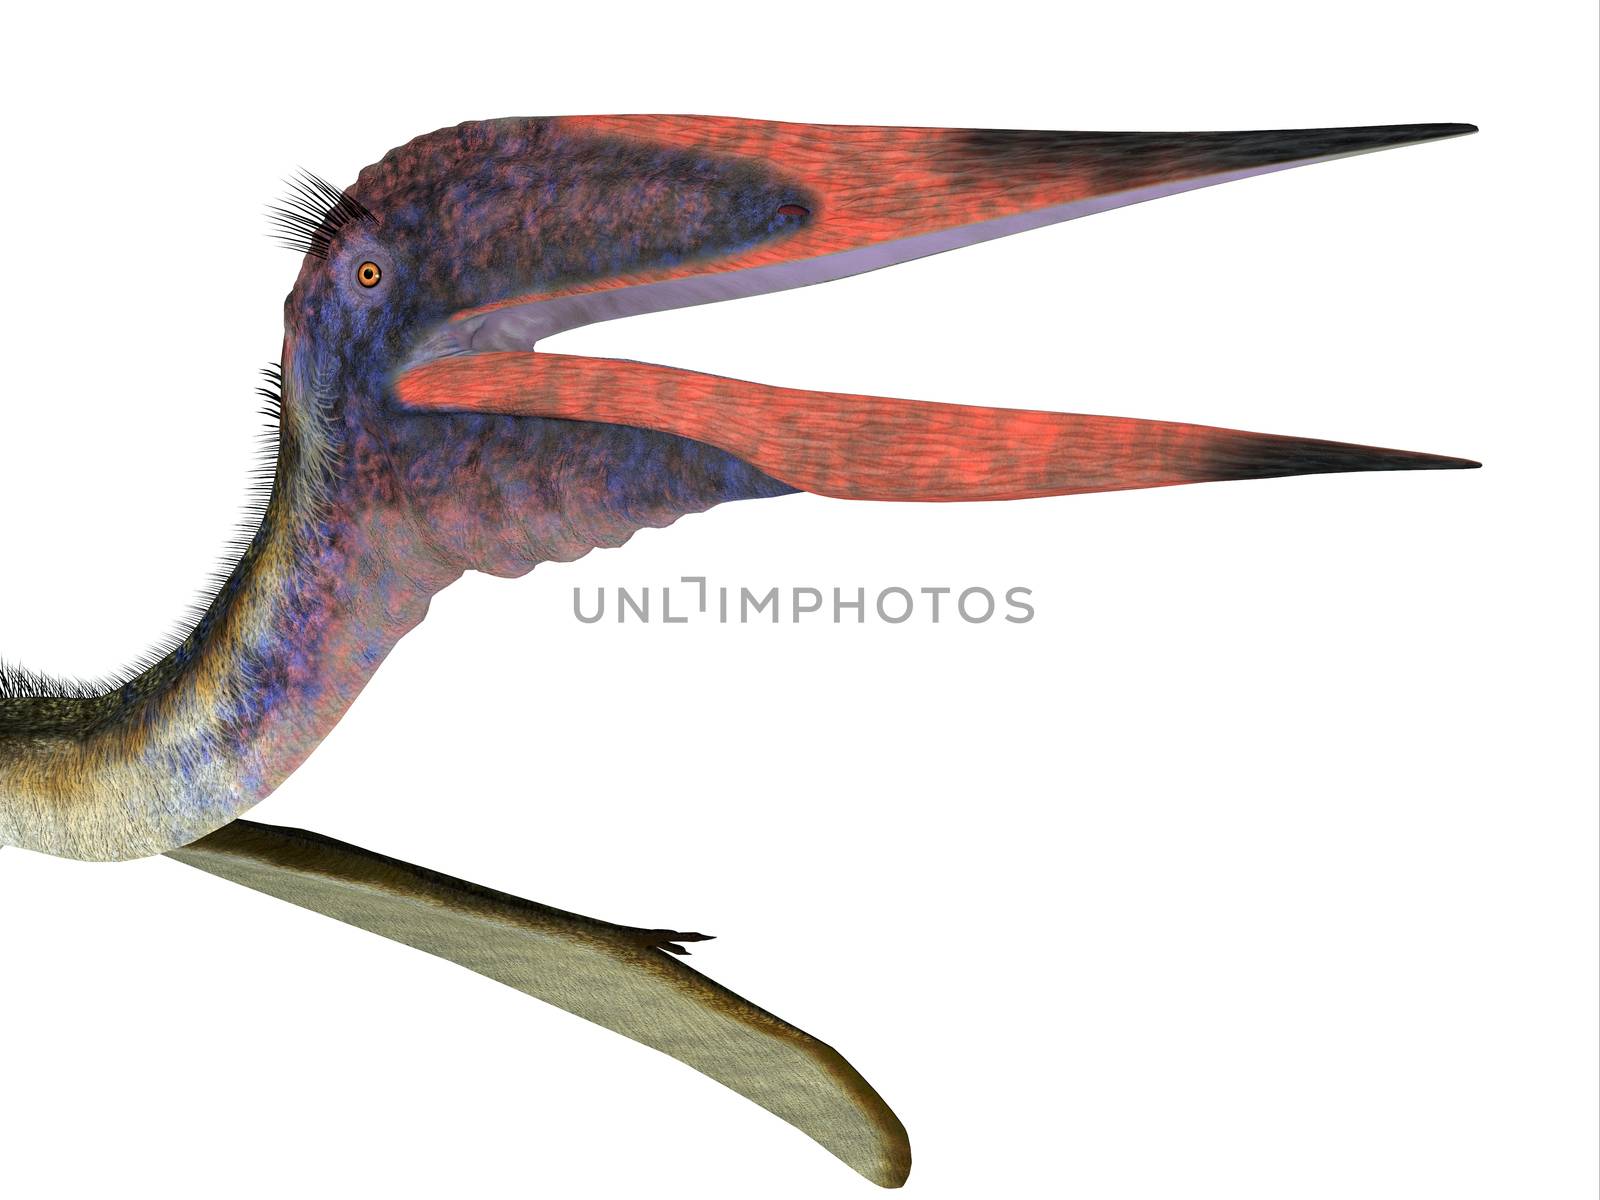 Zhejiangopterus was a carnivorous Pterosaur reptile that lived in China during the Cretaceous Period.